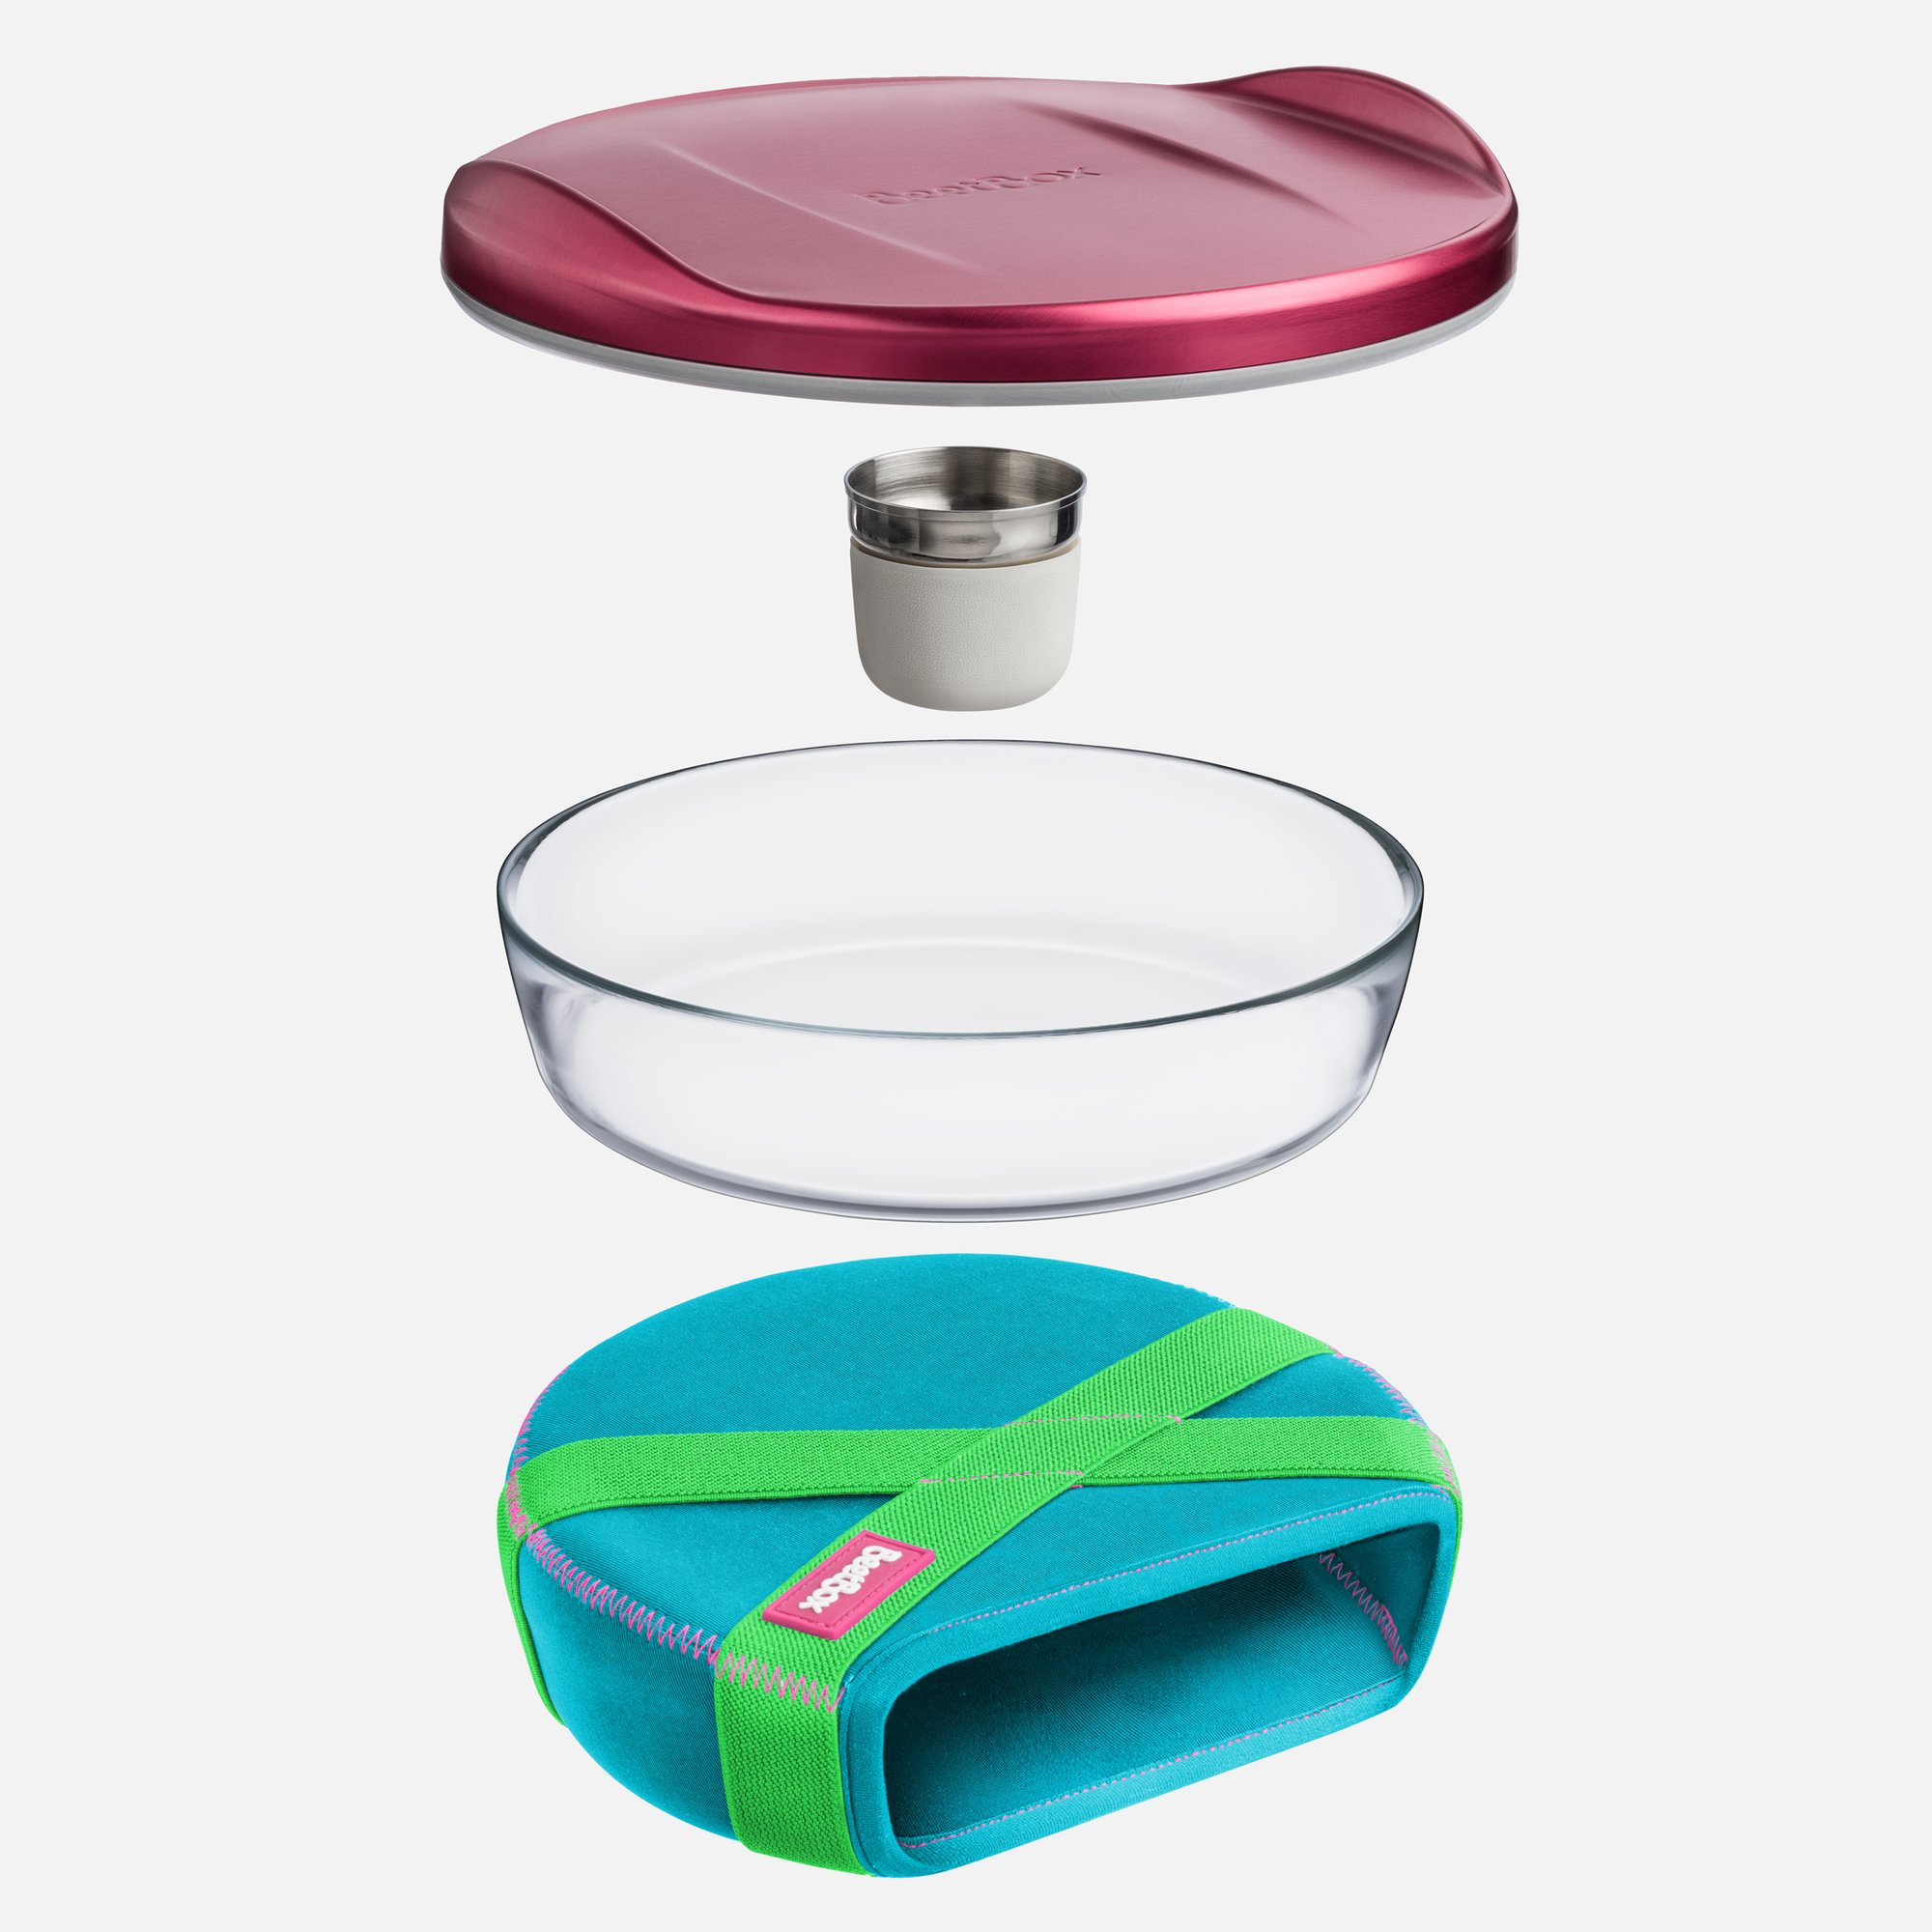 The BeetBox lunch bowl. A glass bowl with a lid, sauce container and sleeve for travel. 